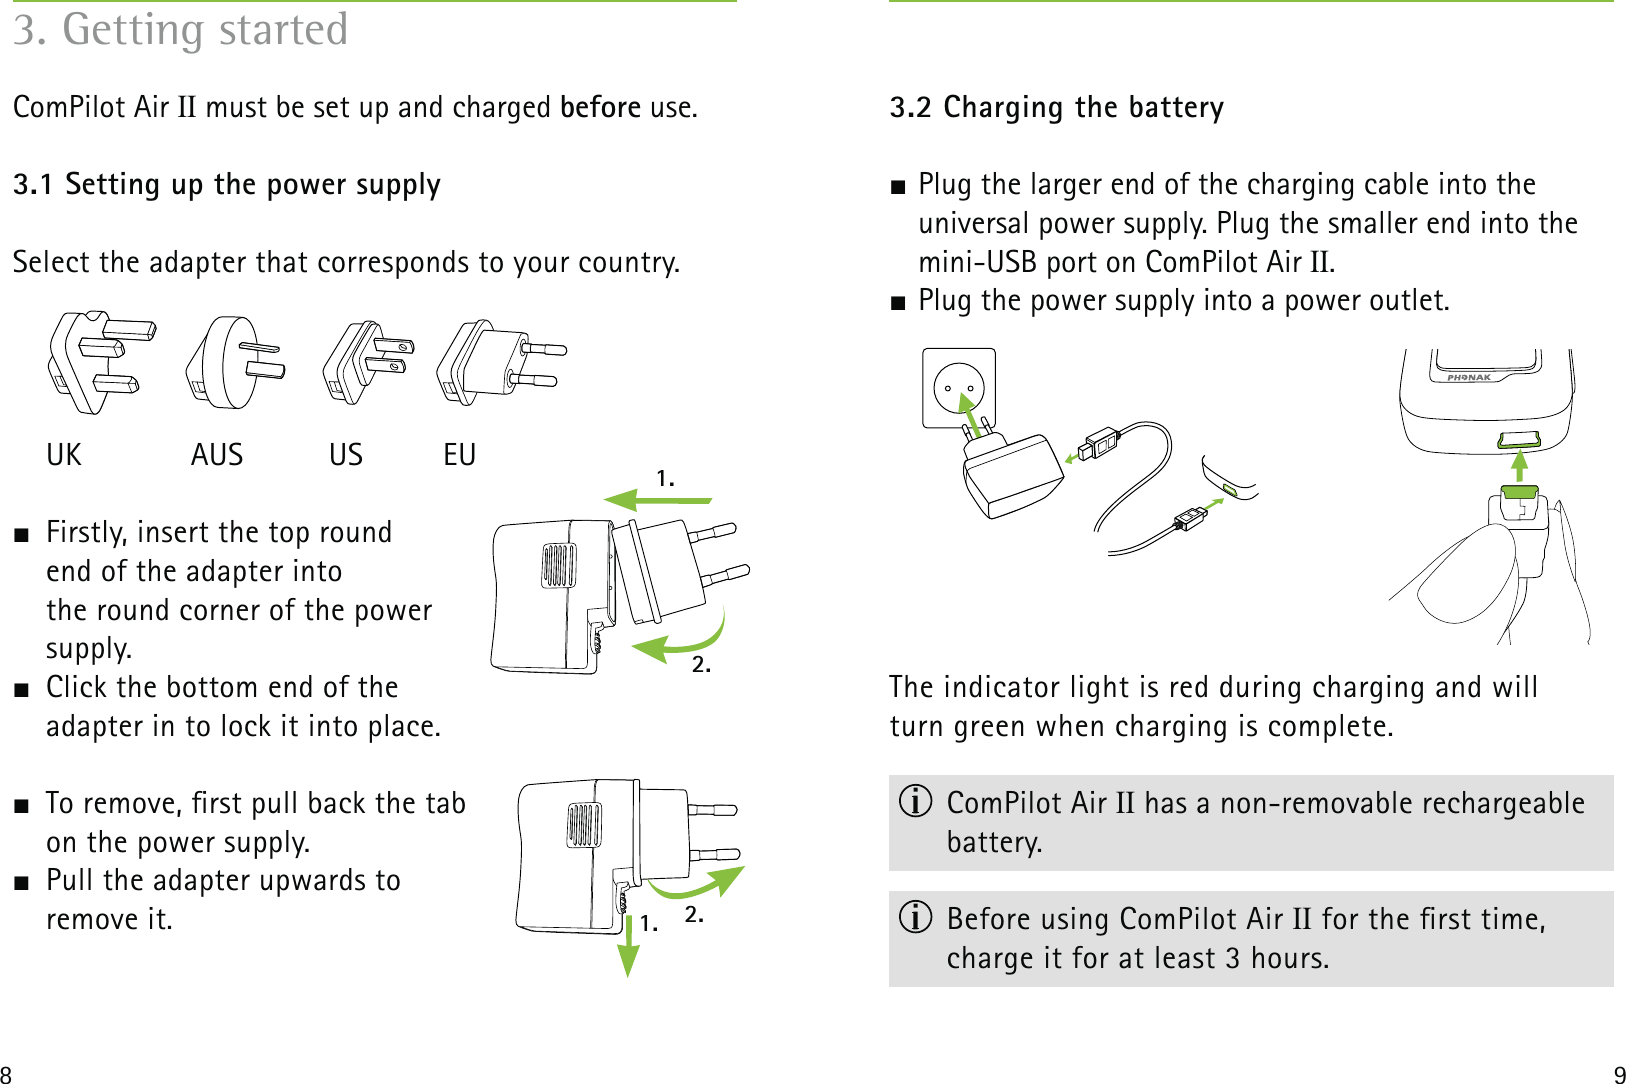 1.1. 2.2.8 93. Getting startedComPilot Air II must be set up and charged before use. 3.1 Setting up the power supply Select the adapter that corresponds to your country. UK  AUS  US  EU  Firstly, insert the top round  end of the adapter into  the round corner of the power  supply.   Click the bottom end of the  adapter in to lock it into place.   To remove, rst pull back the tab  on the power supply.  Pull the adapter upwards to  remove it. 3.2 Charging the battery Plug the larger end of the charging cable into the  universal power supply. Plug the smaller end into the mini-USB port on ComPilot Air II.  Plug the power supply into a power outlet.The indicator light is red during charging and will  turn green when charging is complete. ComPilot Air II has a non-removable rechargeable battery.  Before using ComPilot Air II for the rst time, charge it for at least 3 hours.